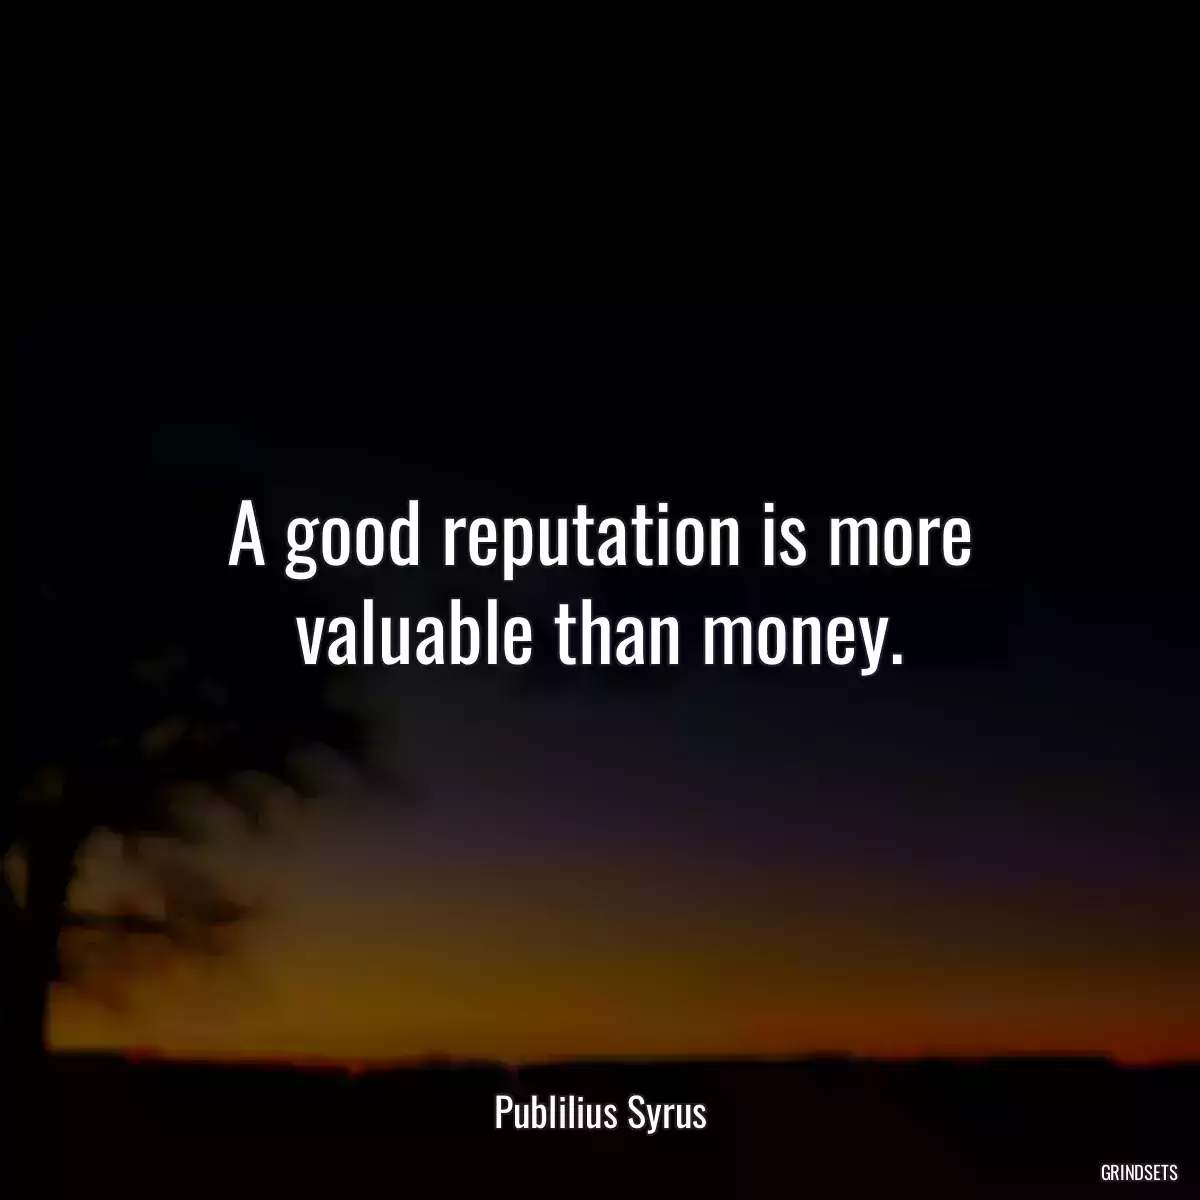 A good reputation is more valuable than money.